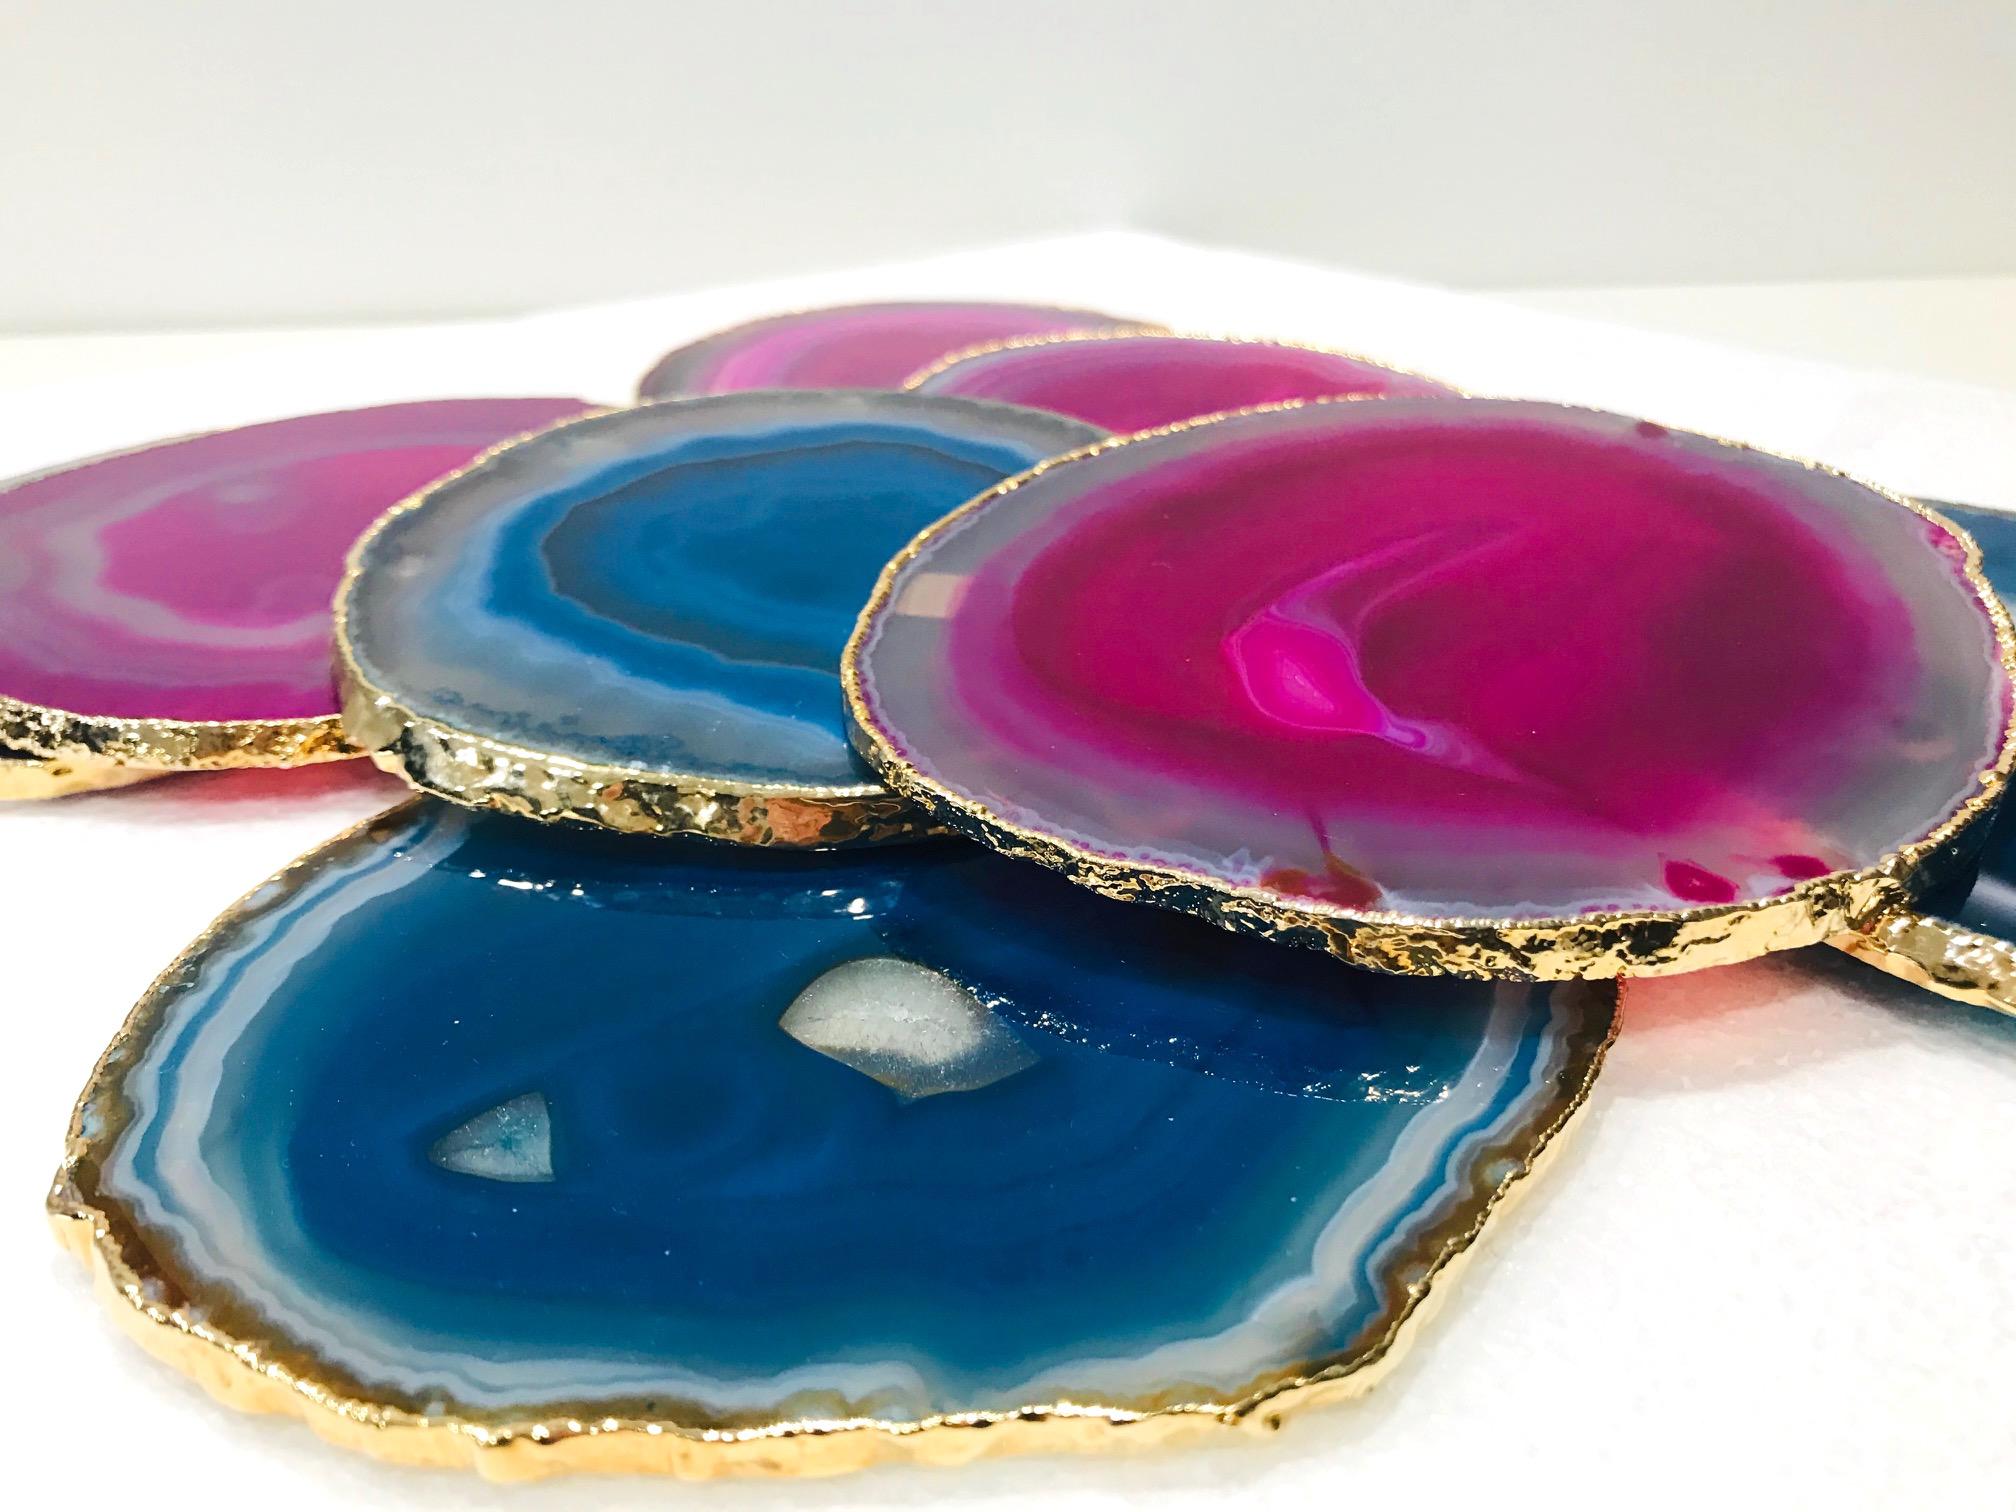 Brazilian Set/ 8 Semi-Precious Gemstone Coasters in Pink and Turquoise with 24K Gold Trim